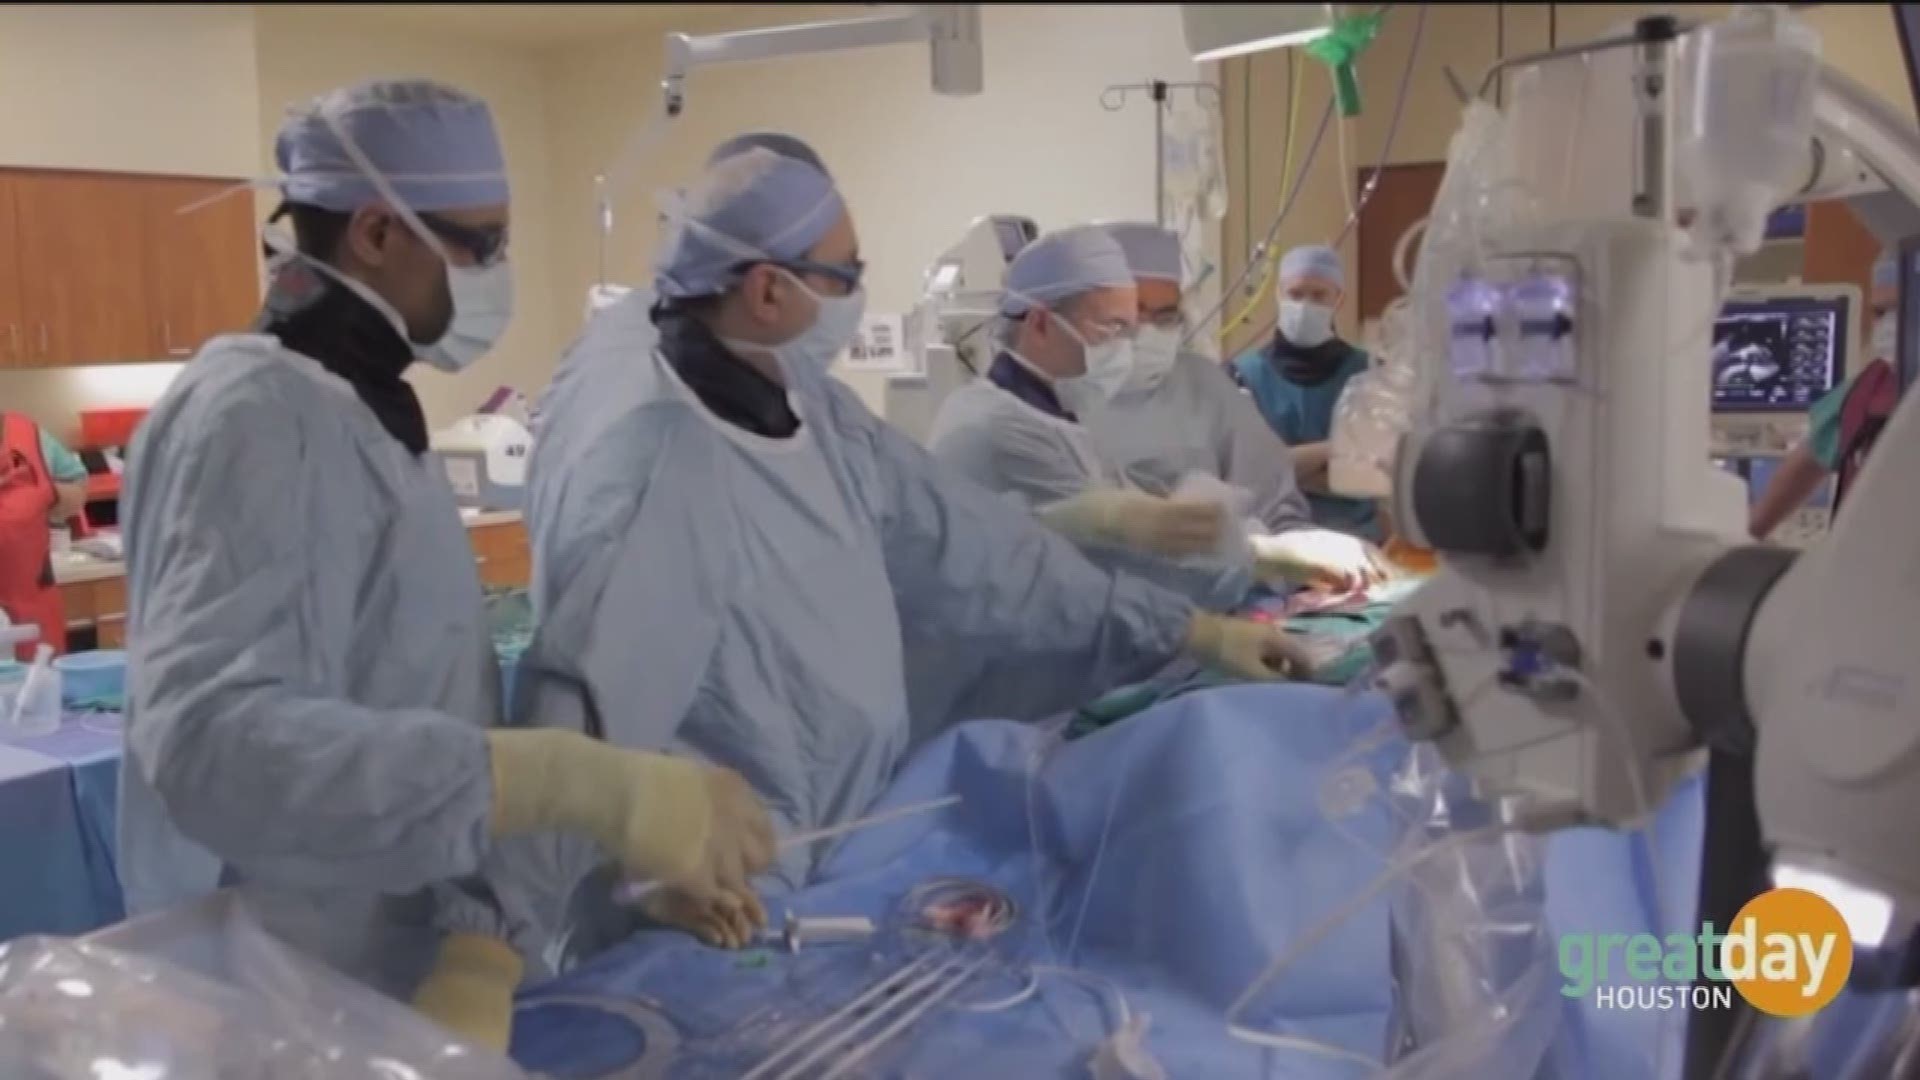 Learn the advancements and treatments offered for open heart surgery at Memorial Hermann.